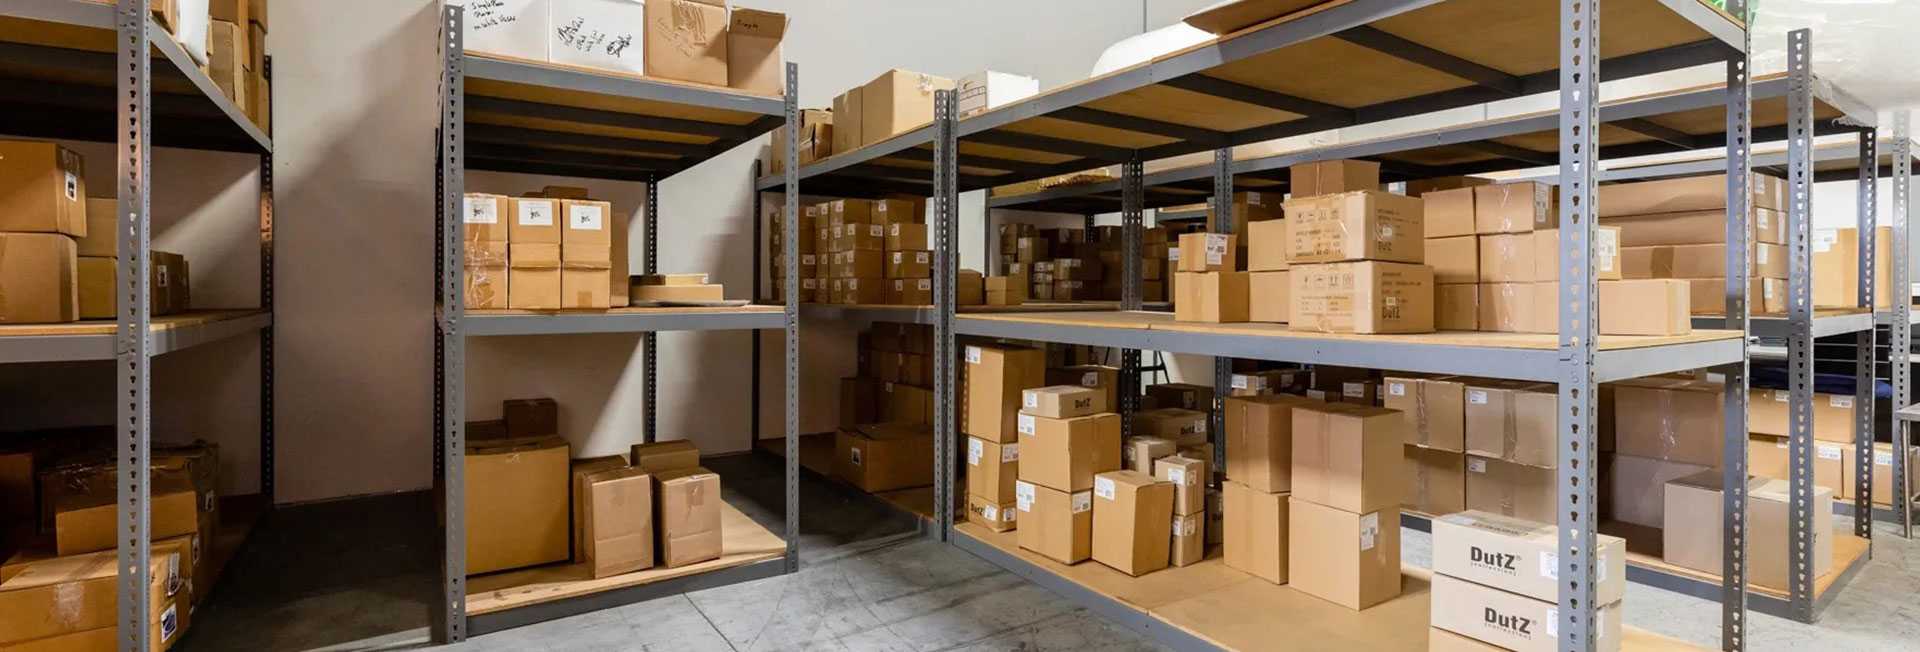 A warehouse filled with shelves and boxes of goods.